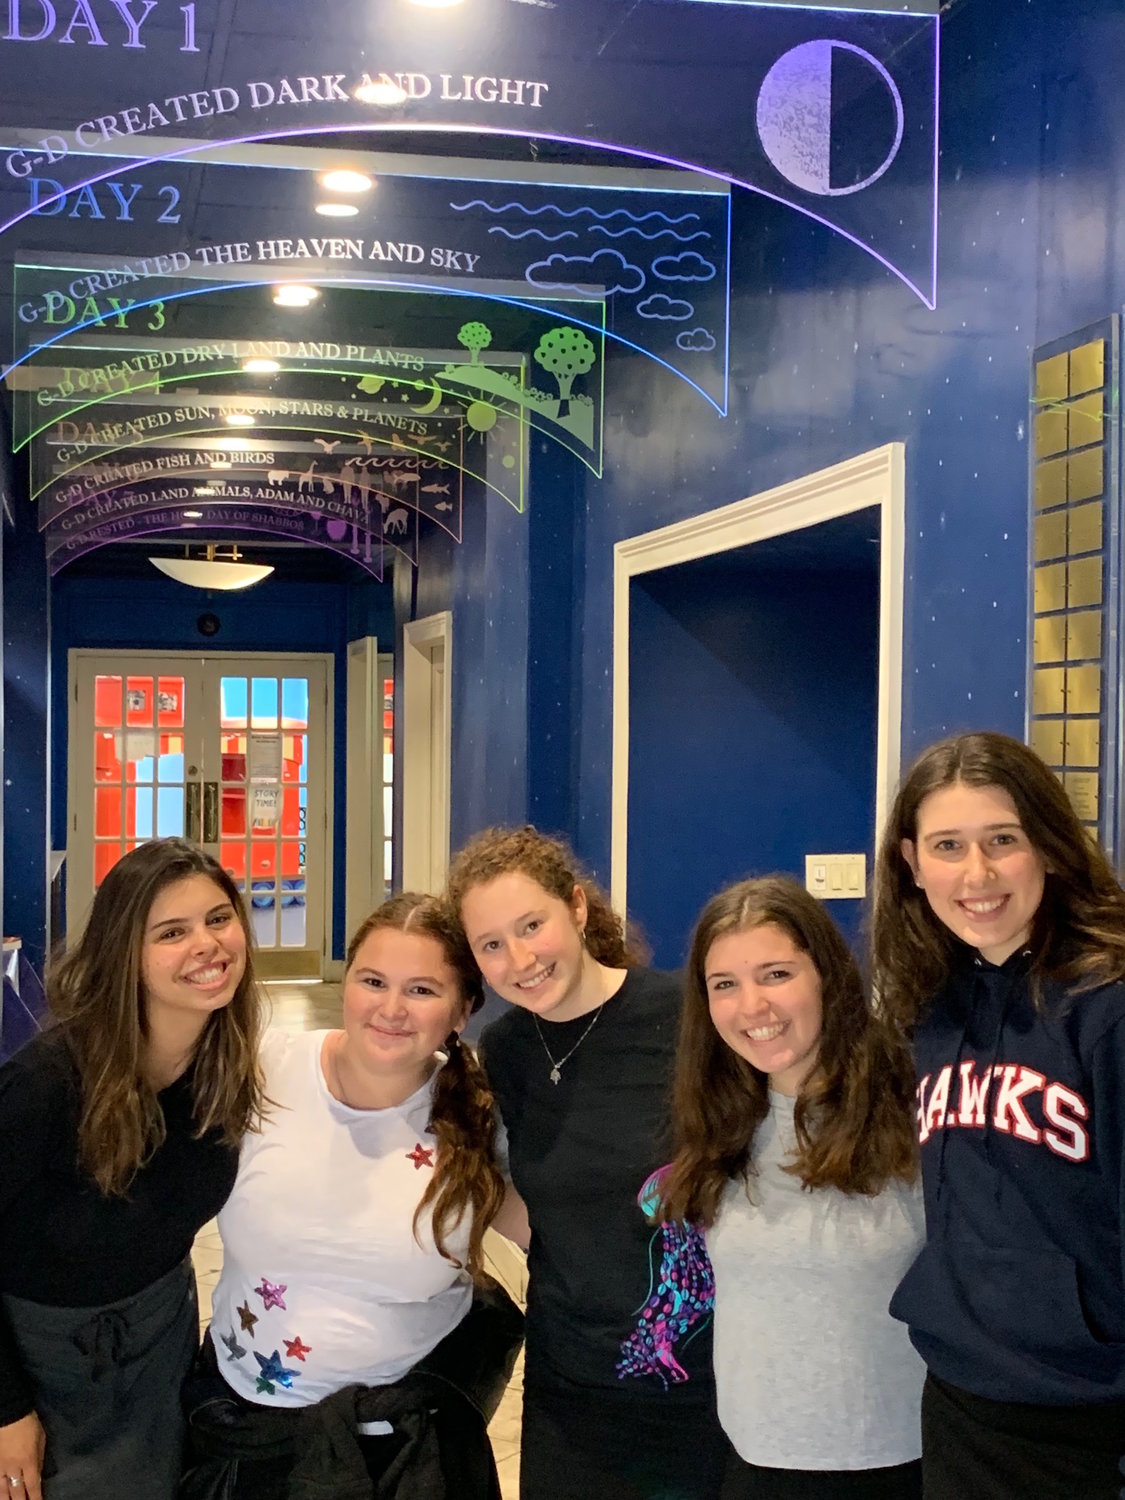 Bunch o’ Bookworms, a high school student volunteer group, help’s Hindi’s Libraries. From left were Susanna Horowitz, Makayla Schein, Ilana Sacolick, Molly Feder and Rachel Gottesman.